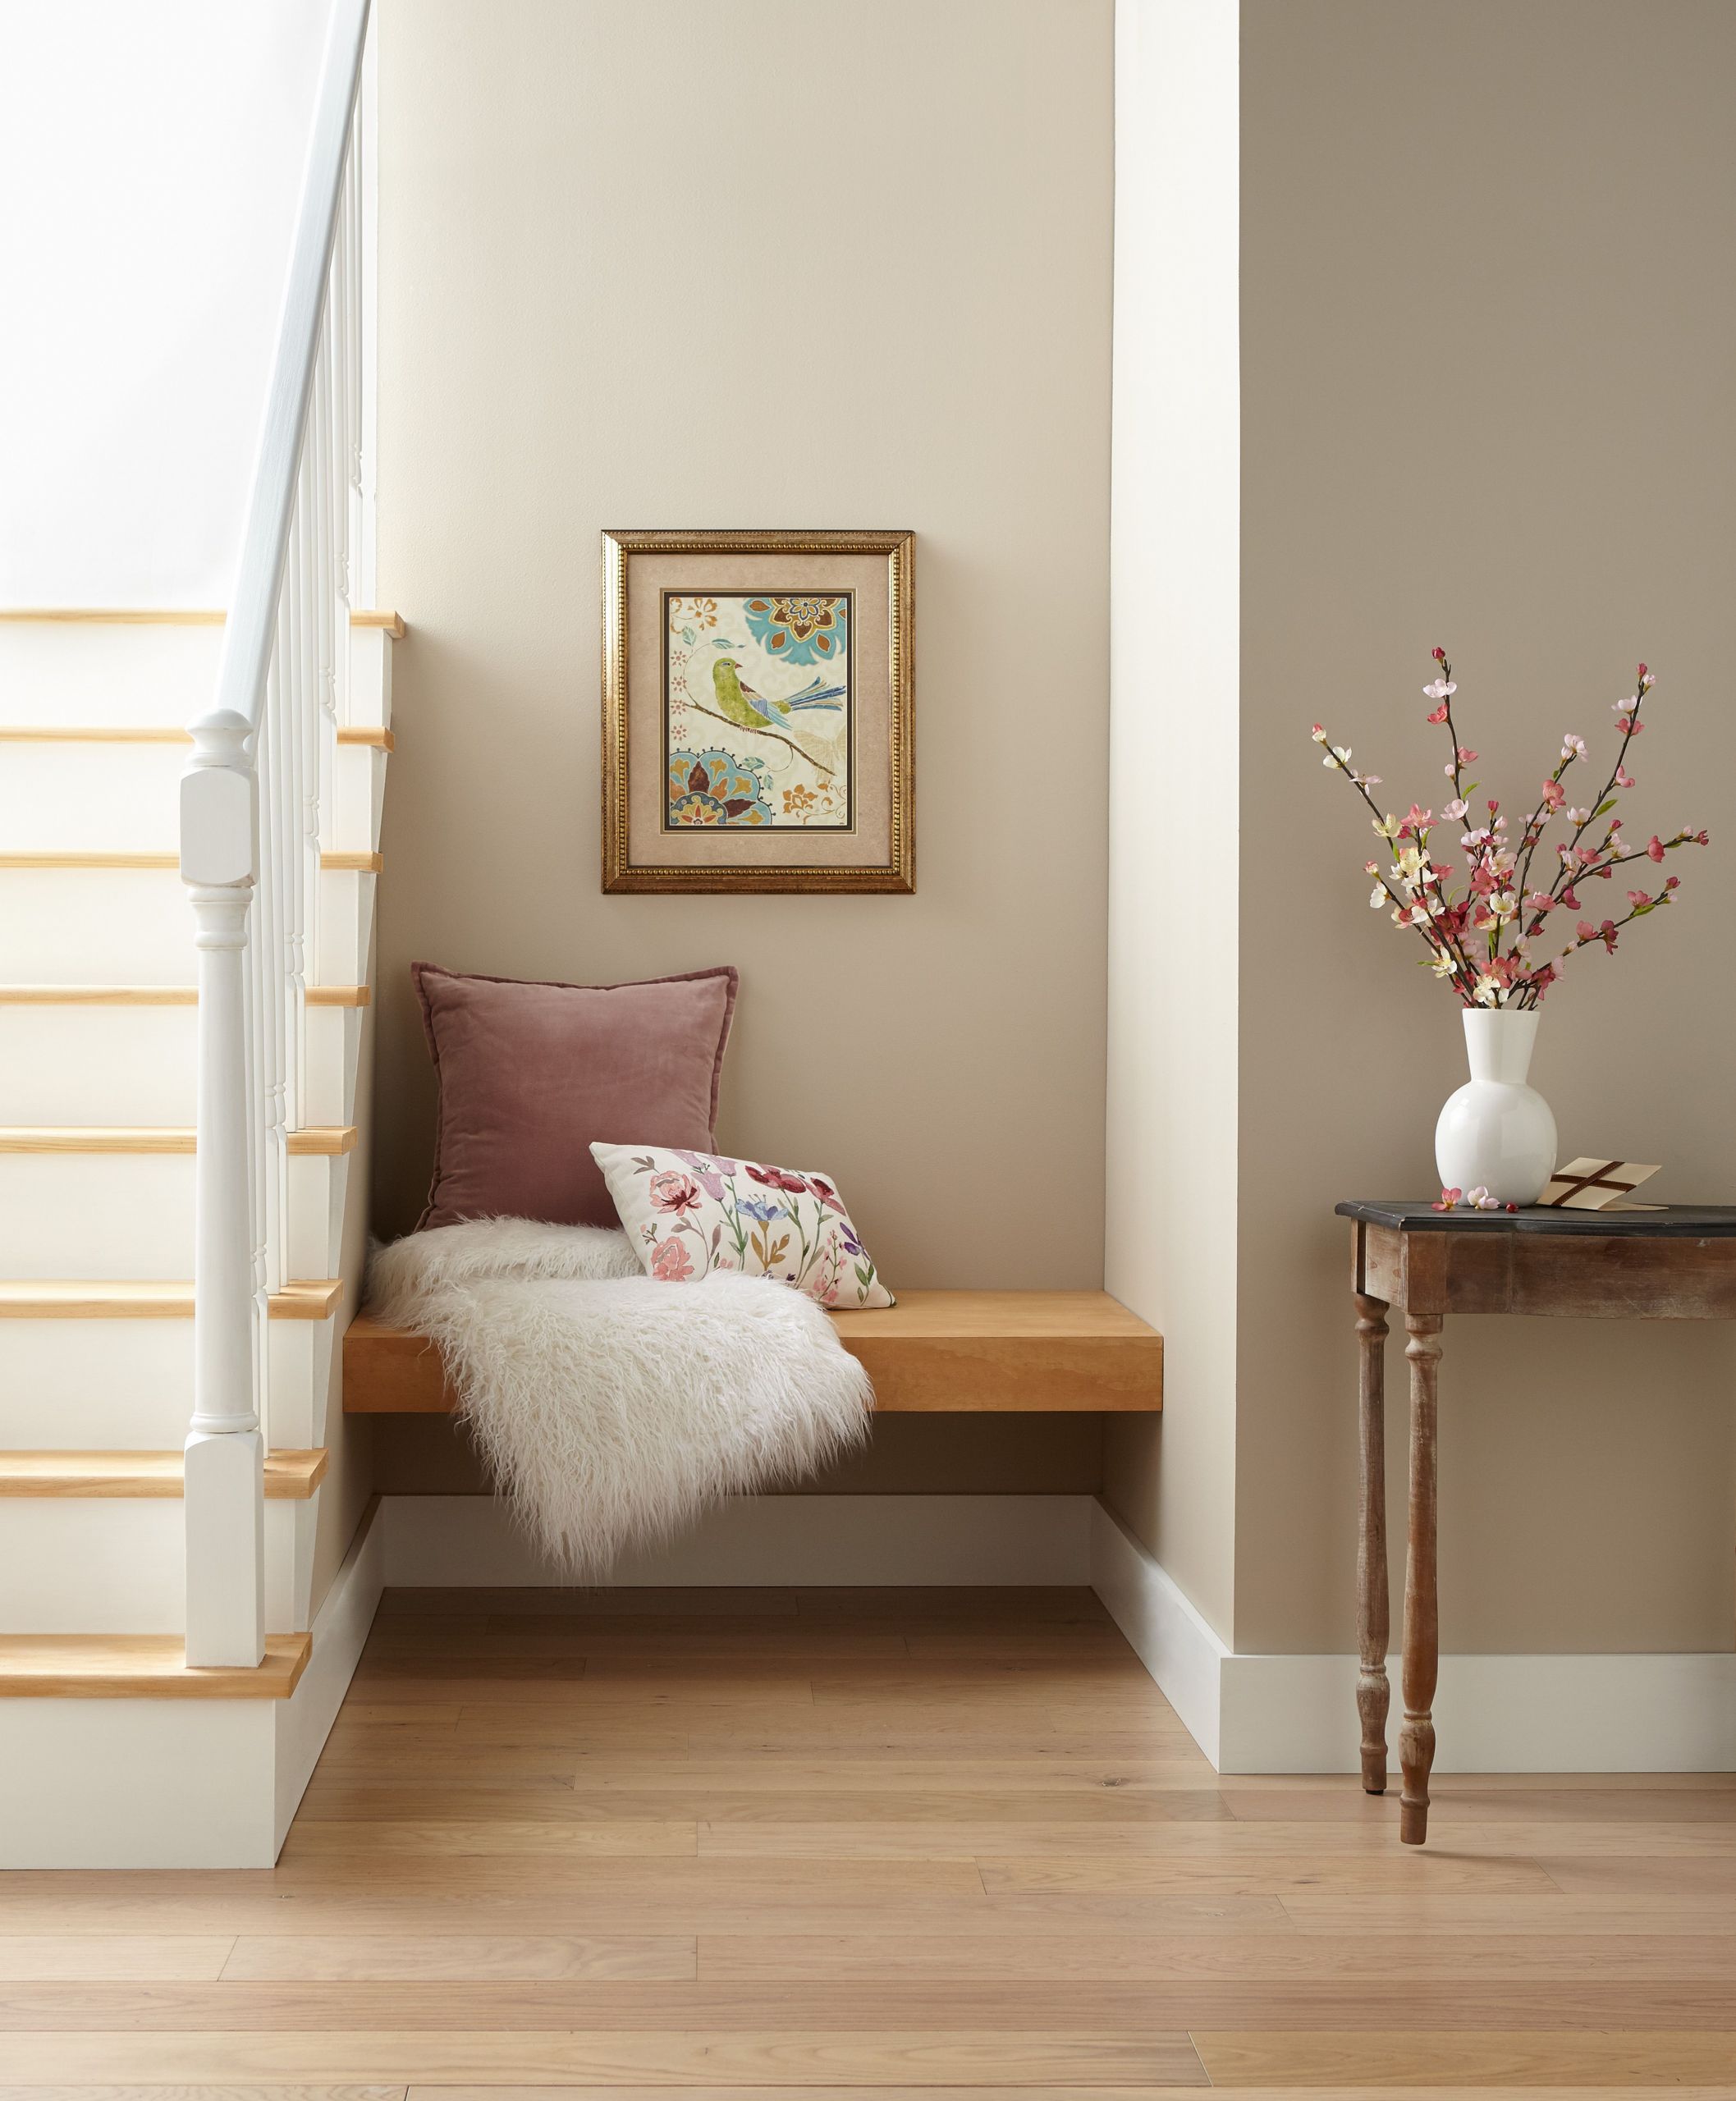 Bedroom Paint Ideas 2020
 These Are the Paint Color Trends for 2020 According to Behr